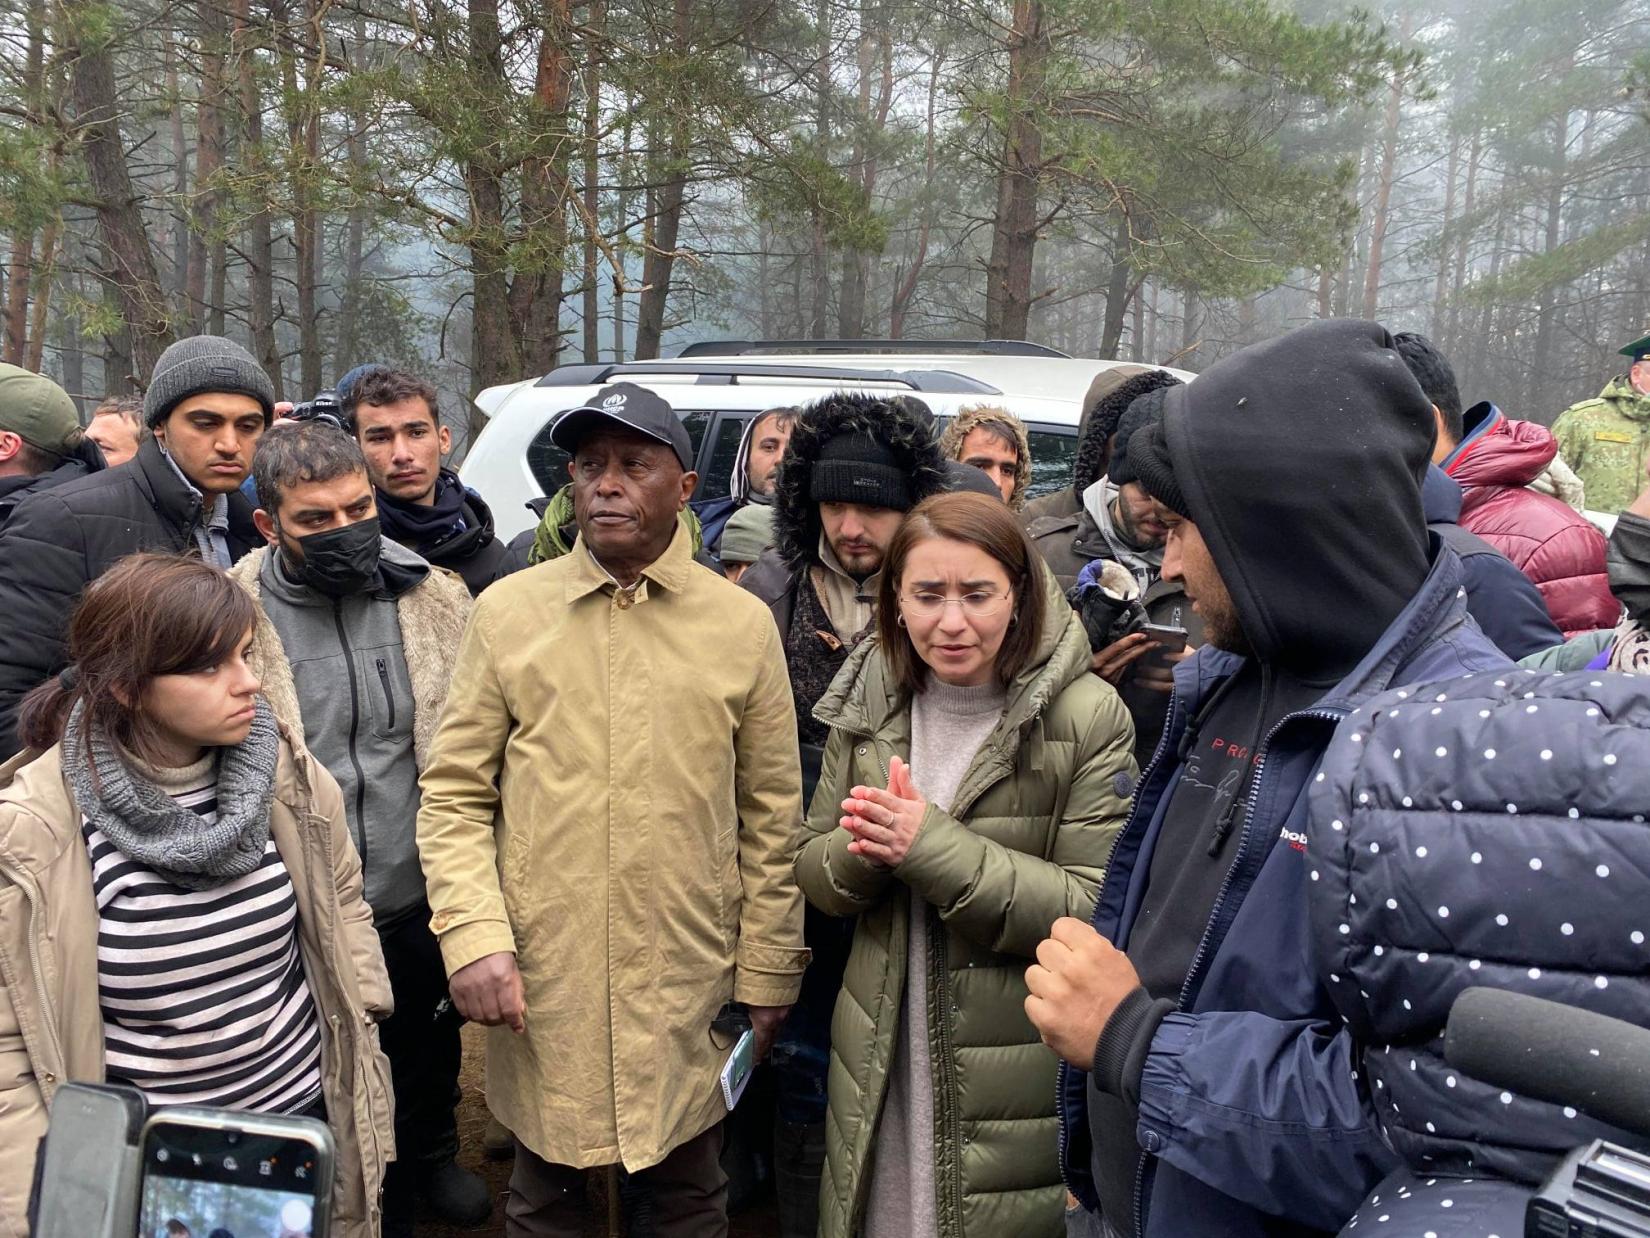 When visiting the camp IOM and UNHCR representatives were able to talk to the migrants and provide the trustworthy information on possible options available to them 